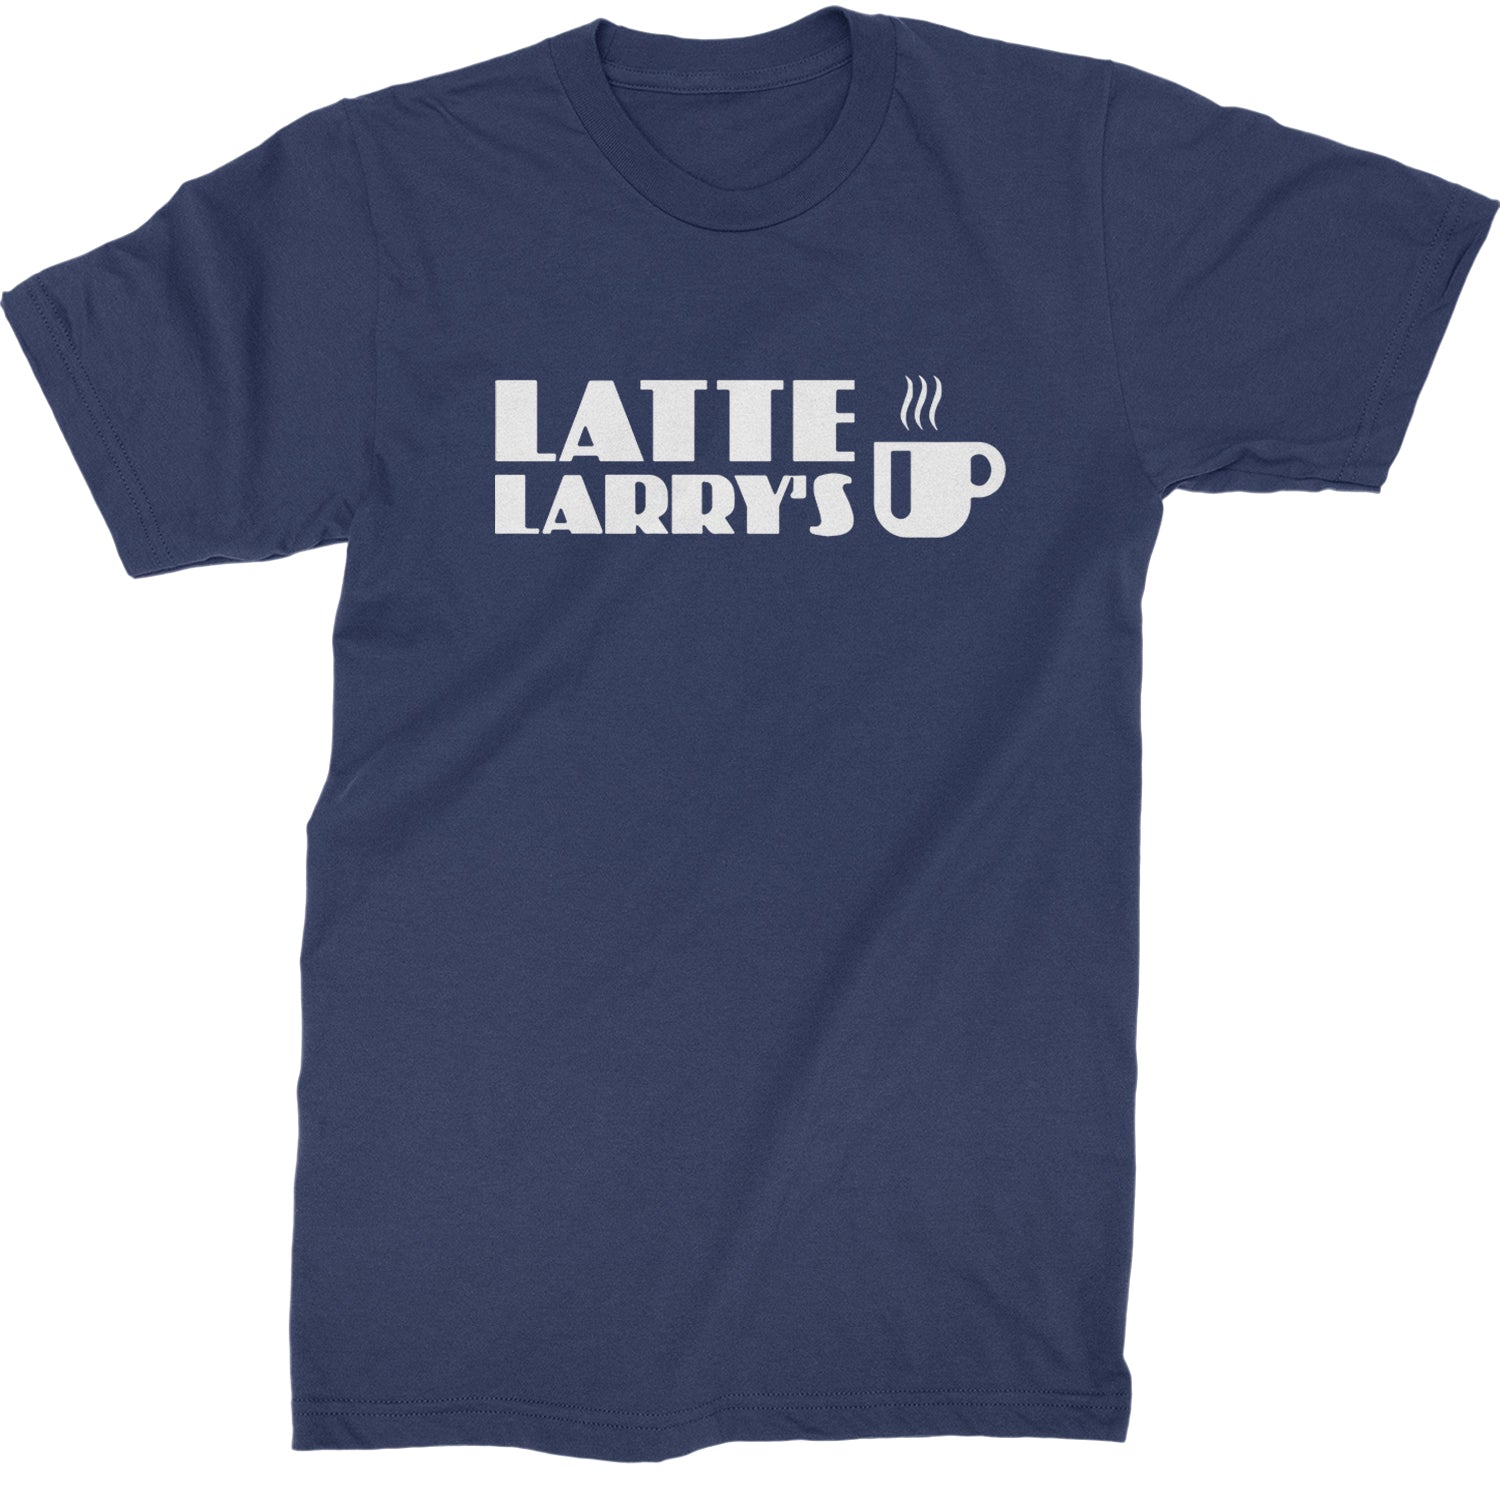 Latte Larry's Enthusiastic Coffee Mens T-shirt Navy Blue